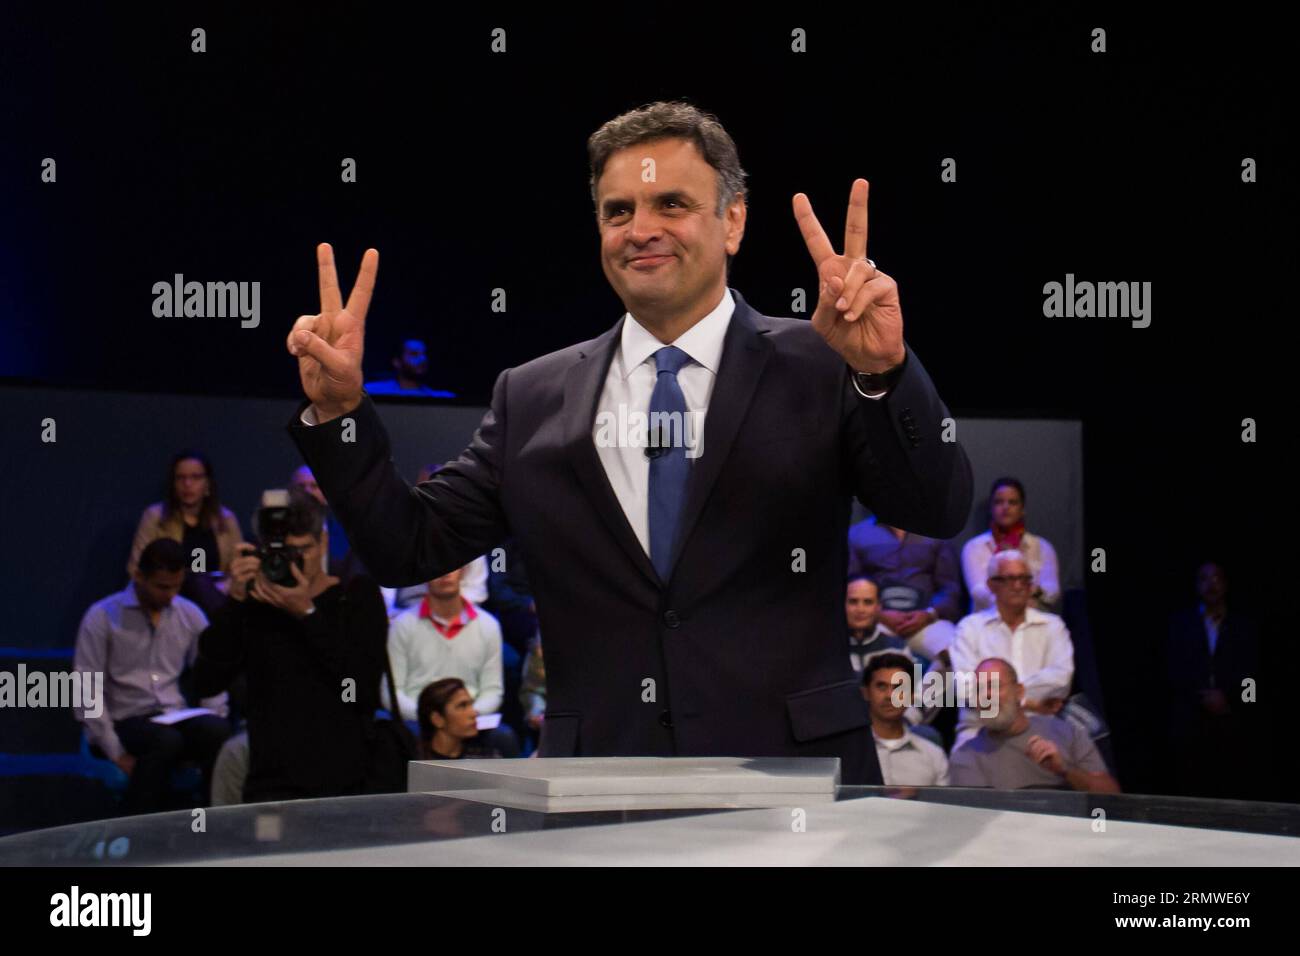 Brazil s presidential candidate for Brazilian Social Democratic Party (PSDB) Aecio Neves attends a television debate in Jacarepagua, west of Rio de Janeiro, Brazil, on Oct. 24, 2014. Brazil s presidential election will be defined on a second round, on Oct. 26, between Dilma Rousseff of PT and Aecio Neves of PSDB. Gustavo Serebrenick/Brazil Photo Press/Estadao Conteudo/AGENCIA ESTADO) (zhf) BRAZIL OUT BRAZIL-RIO DE JANEIRO-POLITICS-ELECTIONS AGENCIAxESTADIO PUBLICATIONxNOTxINxCHN   Brazil S Presidential Candidate for Brazilian Social Democratic Party PSDB Aecio Neves Attends a Television Debate Stock Photo